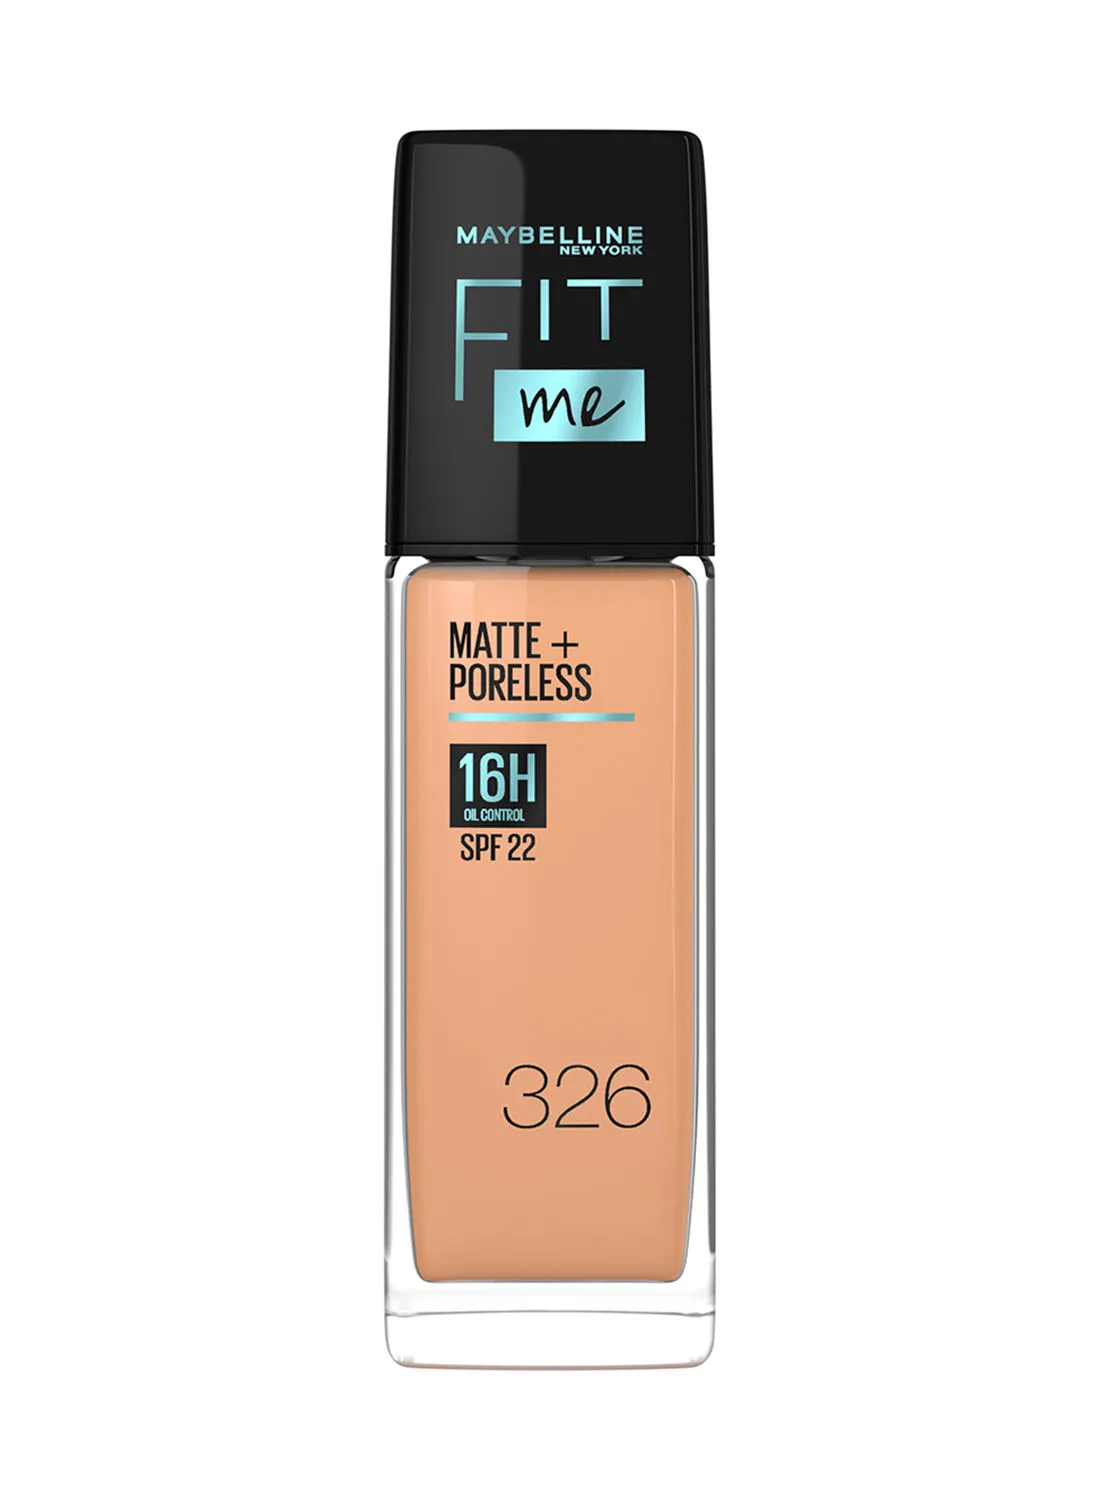 MAYBELLINE NEW YORK Maybelline New York Fit Me Matte & Poreless Foundation 16H Oil Control with SPF 22 - 326